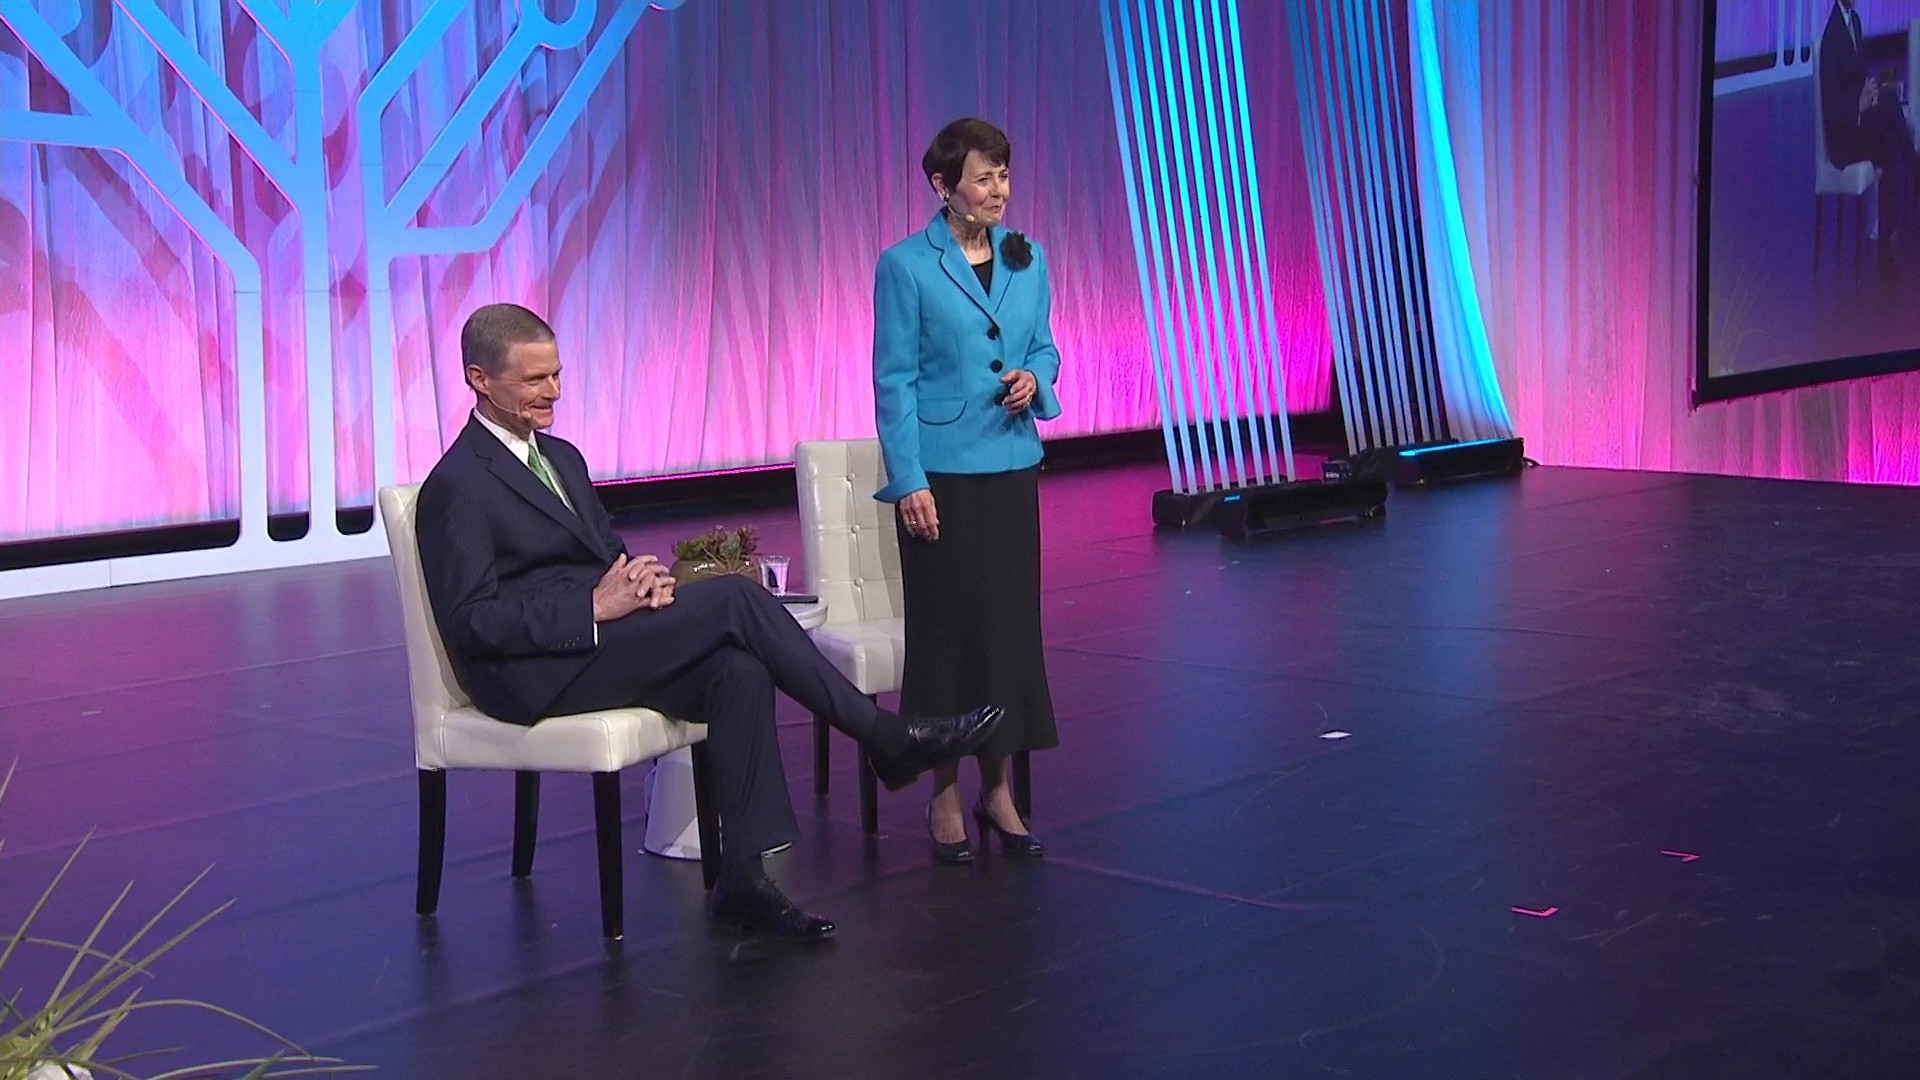 2019 RootsTech Presentation with the Bednars.